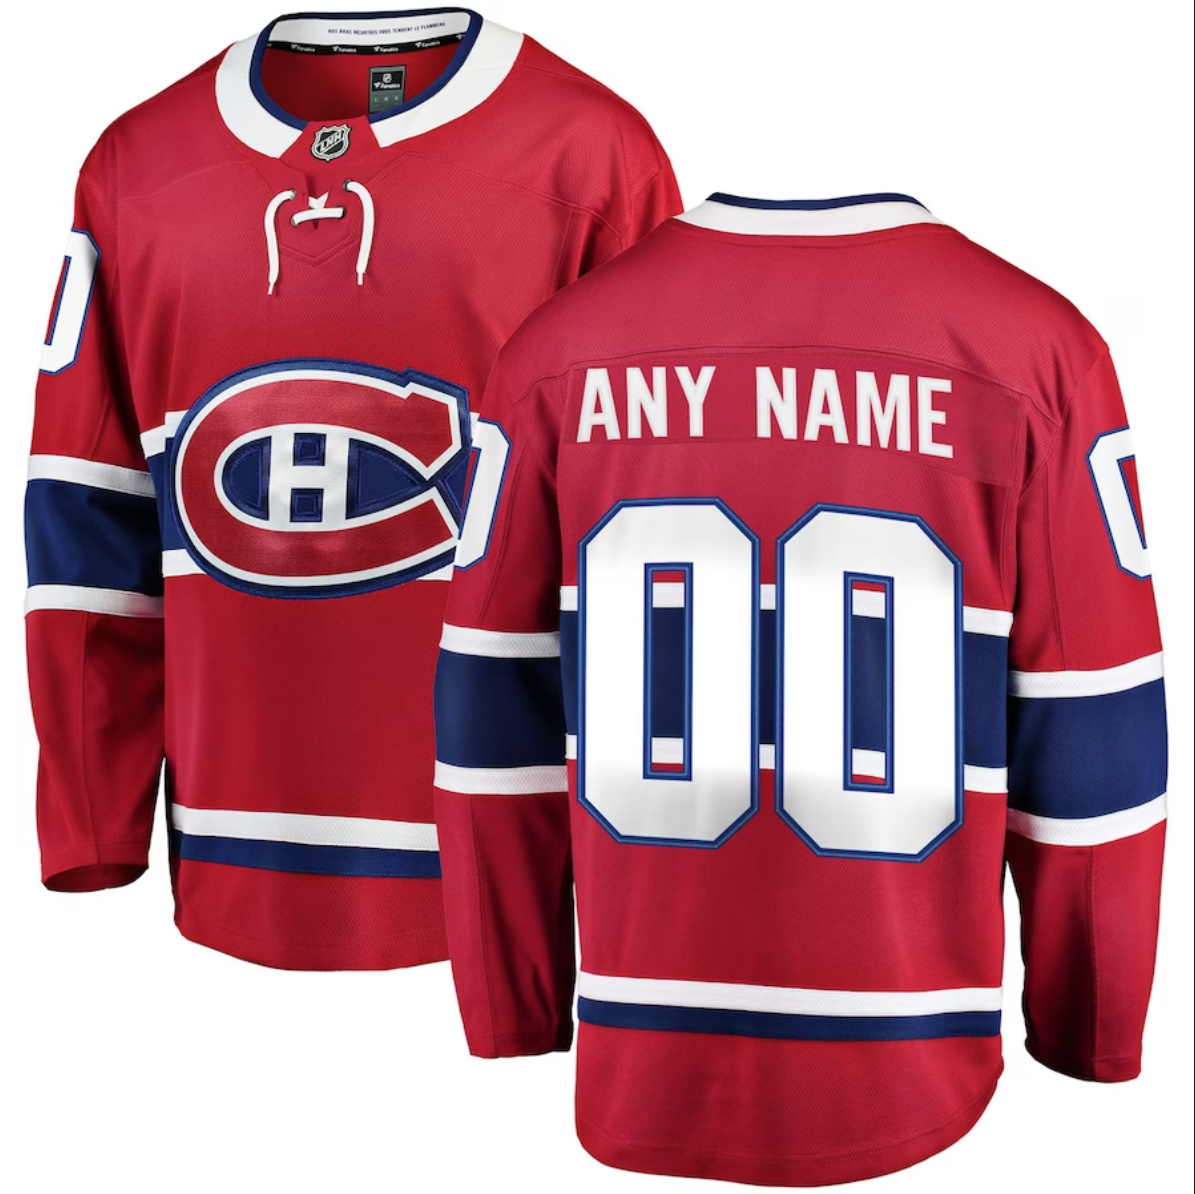 Customized Mens NHL Montreal Canadiens Adidas Primegreen Away Red